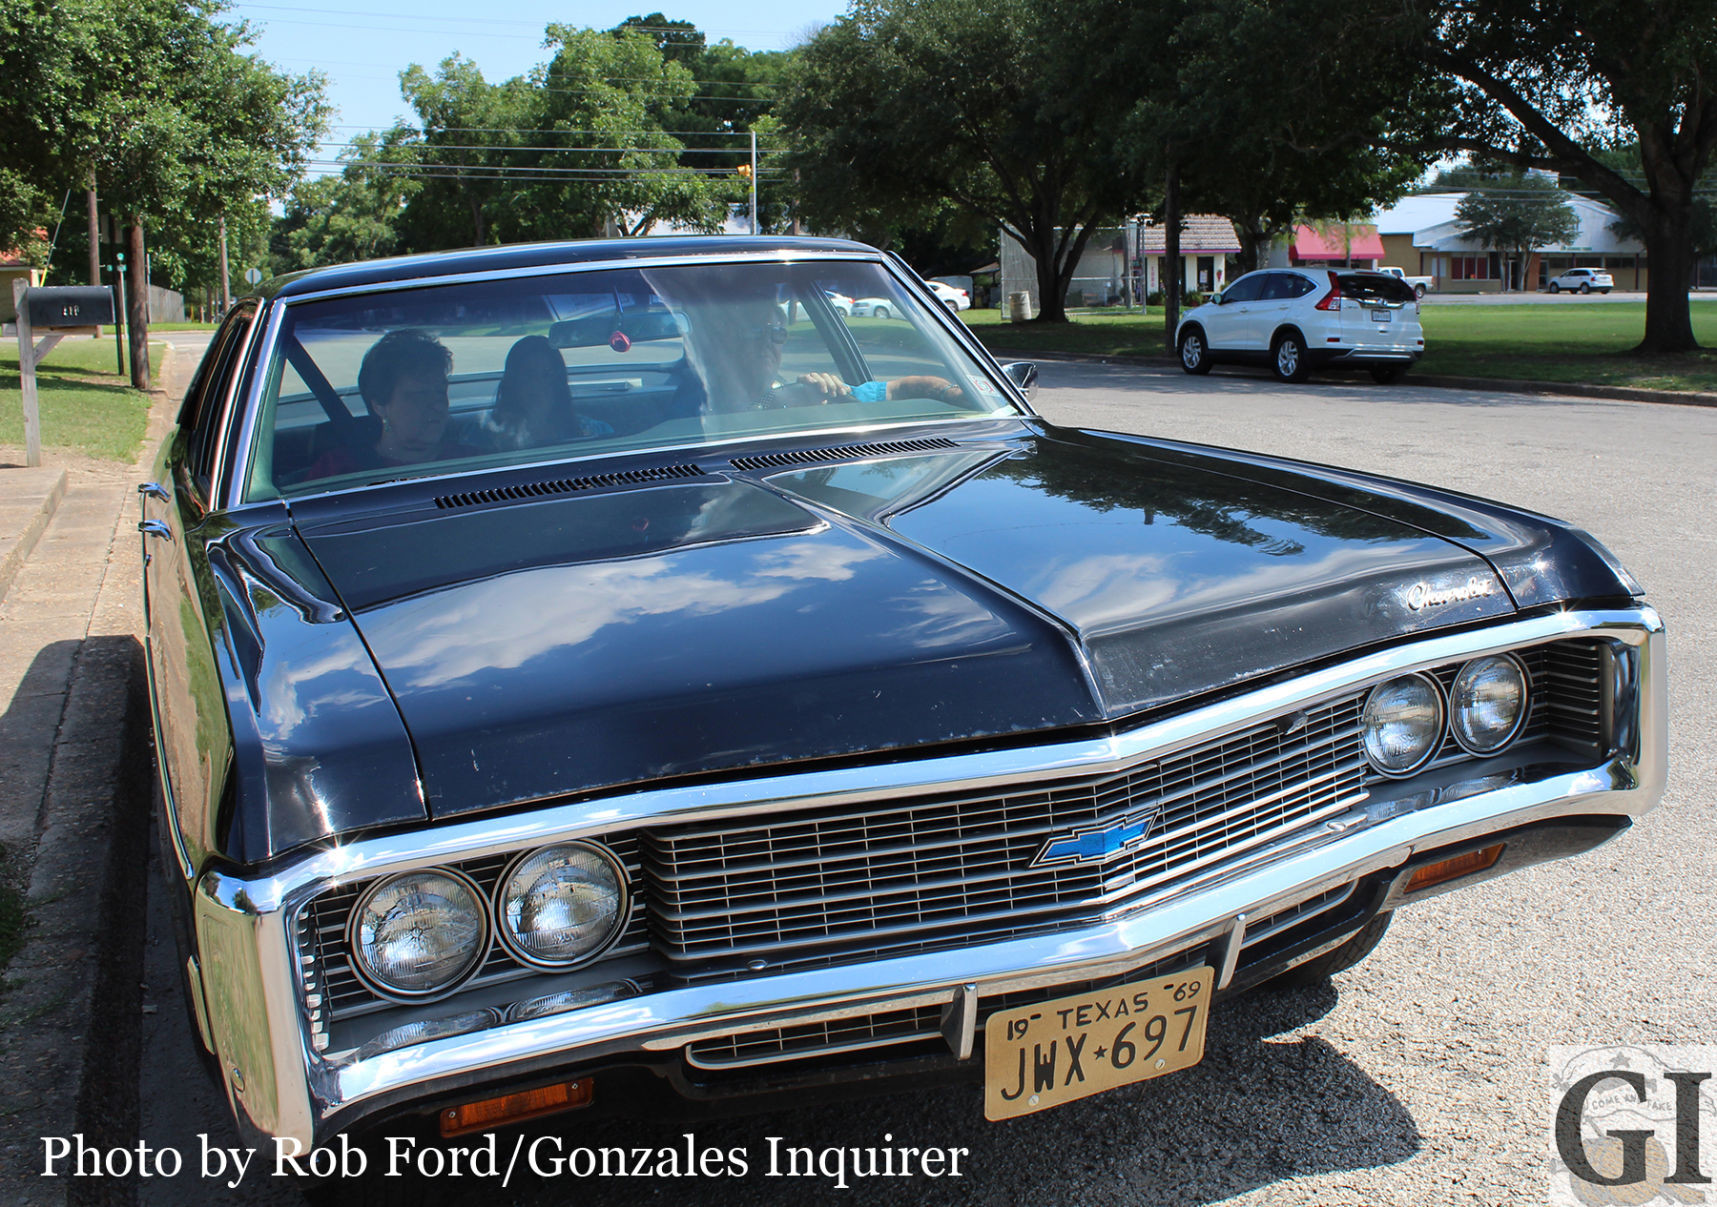 Sporting his classic Chevrolet Bel Air, Tommy Schurig has won car shows in cities like Gonzales, Luling and Flatonia. 